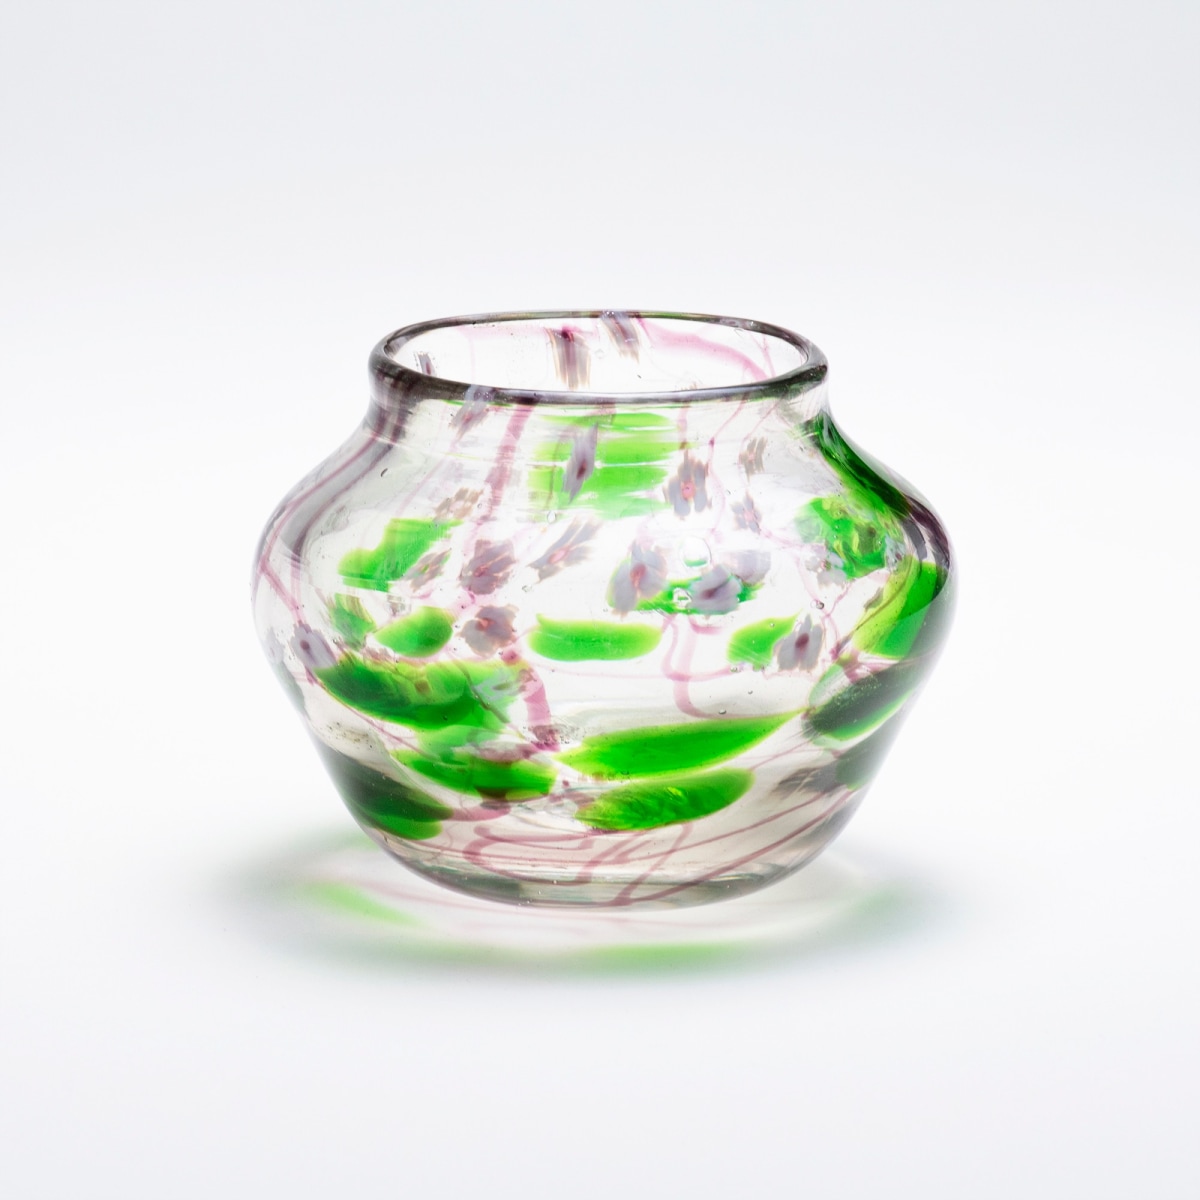 a blown favrile glass vase by tiffany studios, the irregular clear rounded body with a motif of swirling abstract thin vines in a shade of purple, with bright green round leaves interspersed throughout, with tiny white &quot;millefiori&quot; flowers.